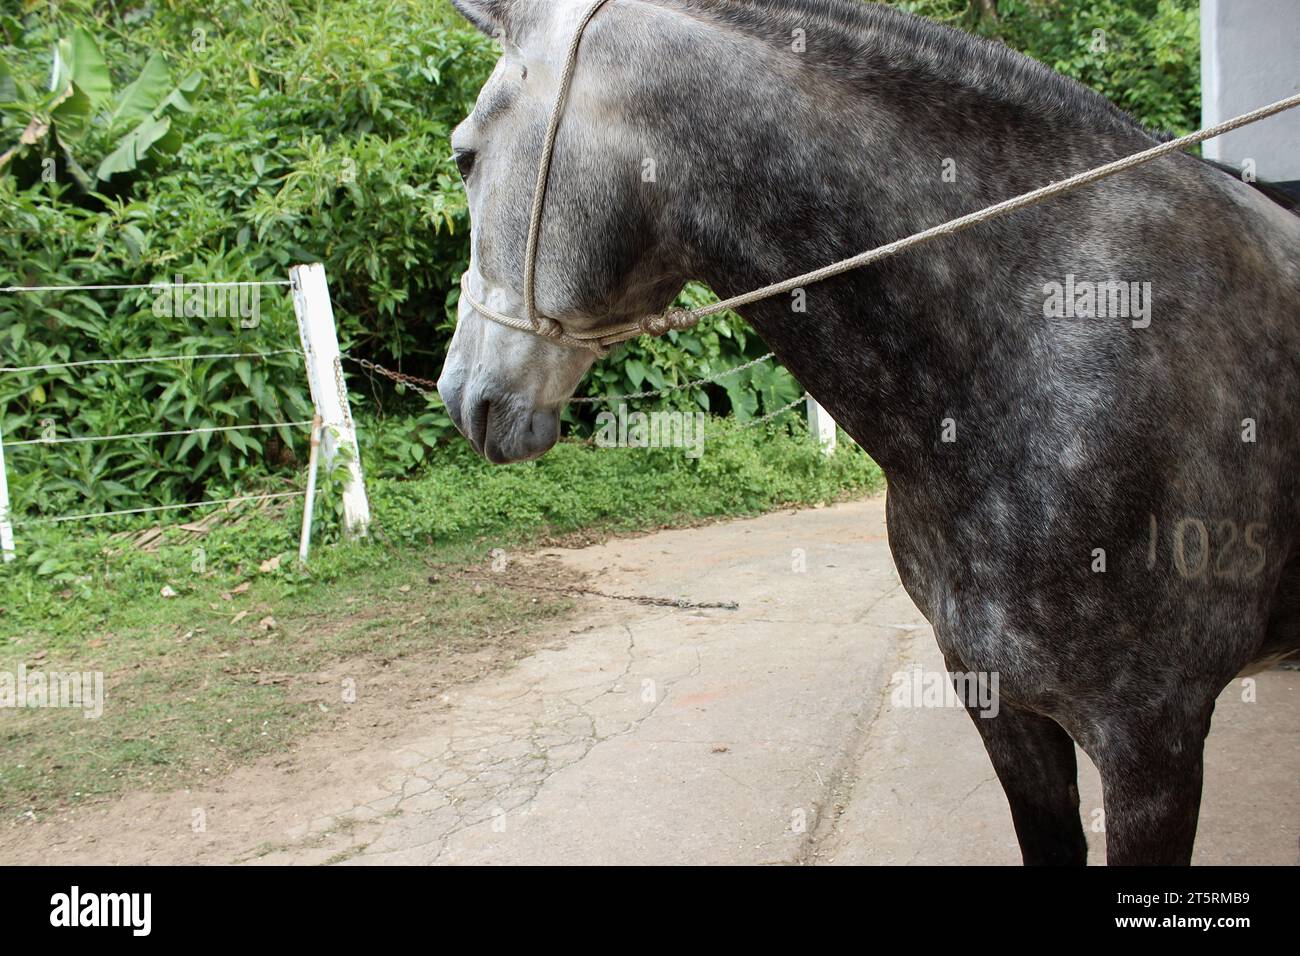 Brindle horse, in white, black, and gray colors, with a numerical identification marking on the skin. The equine is equipped with a rope bridle. Stock Photo